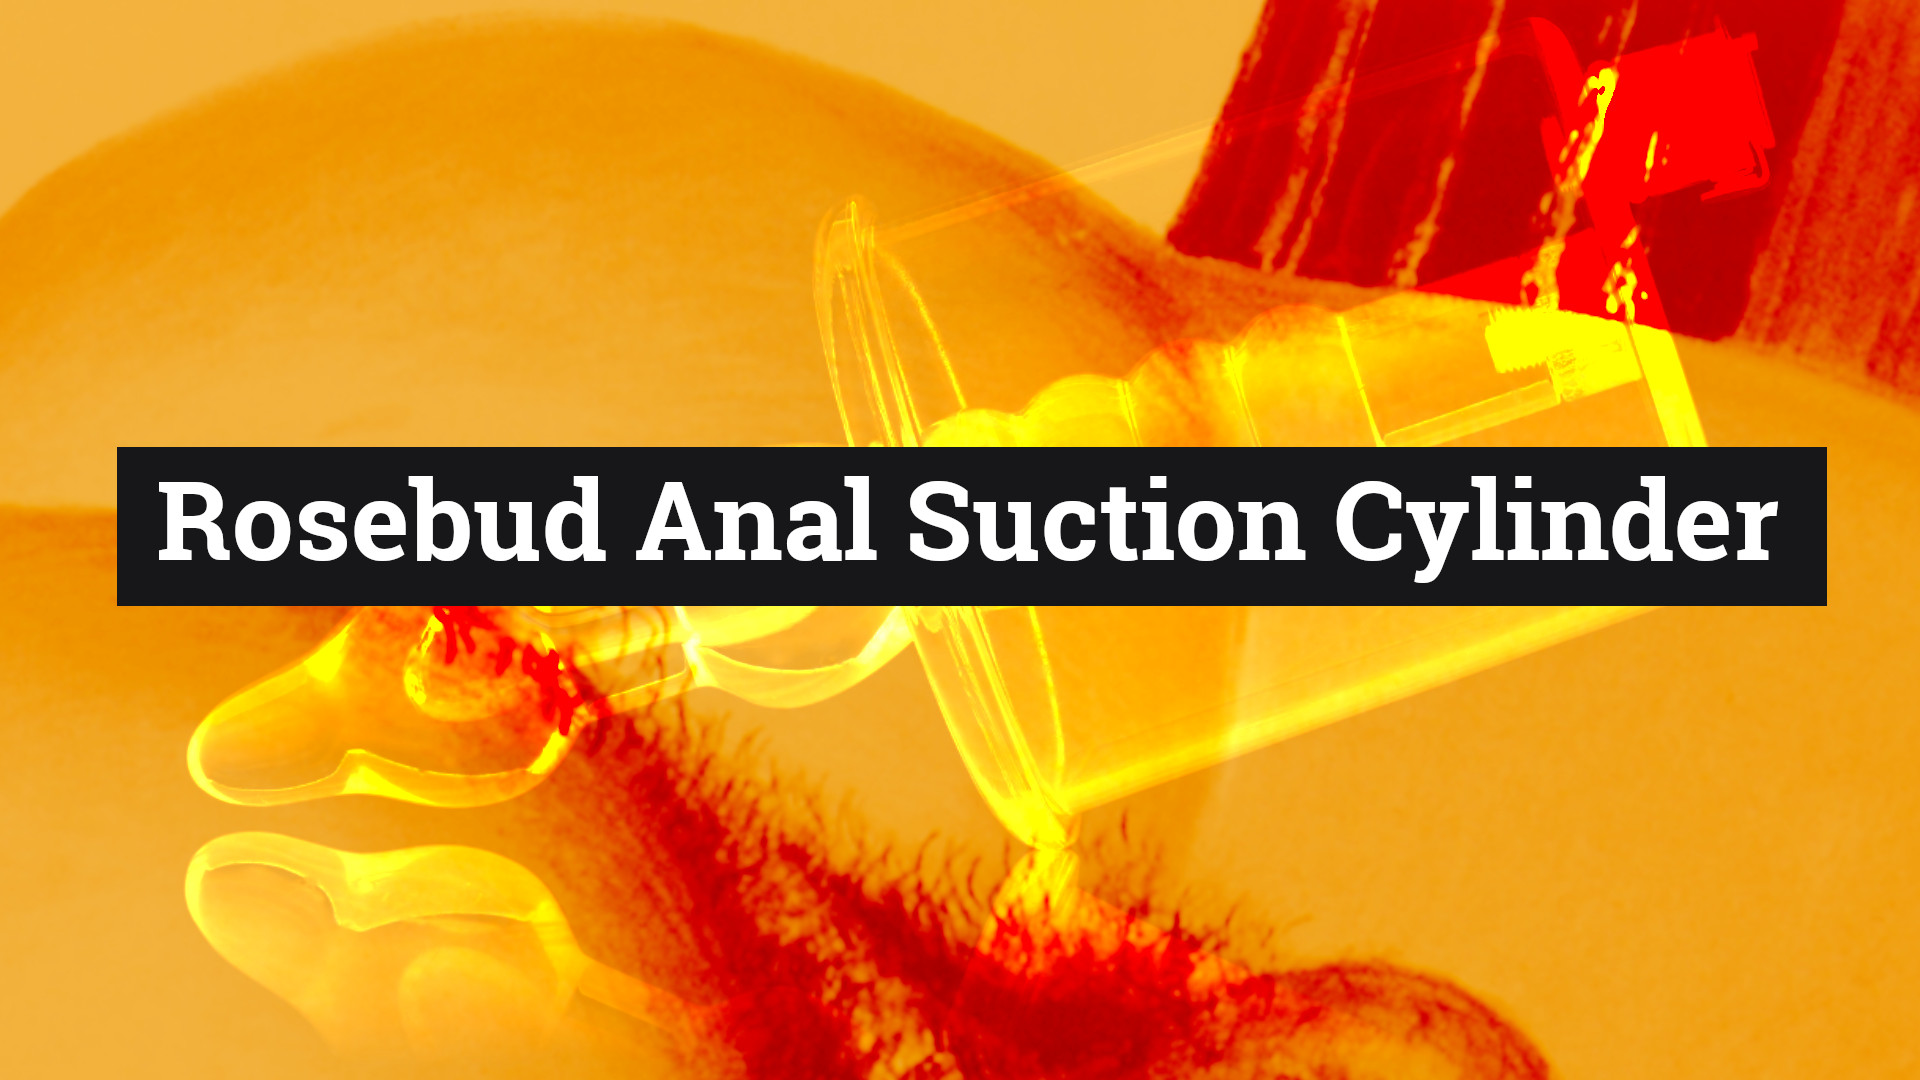 The Rosebud Anal Suction Cylinder Does The Rosebud Anal Suction